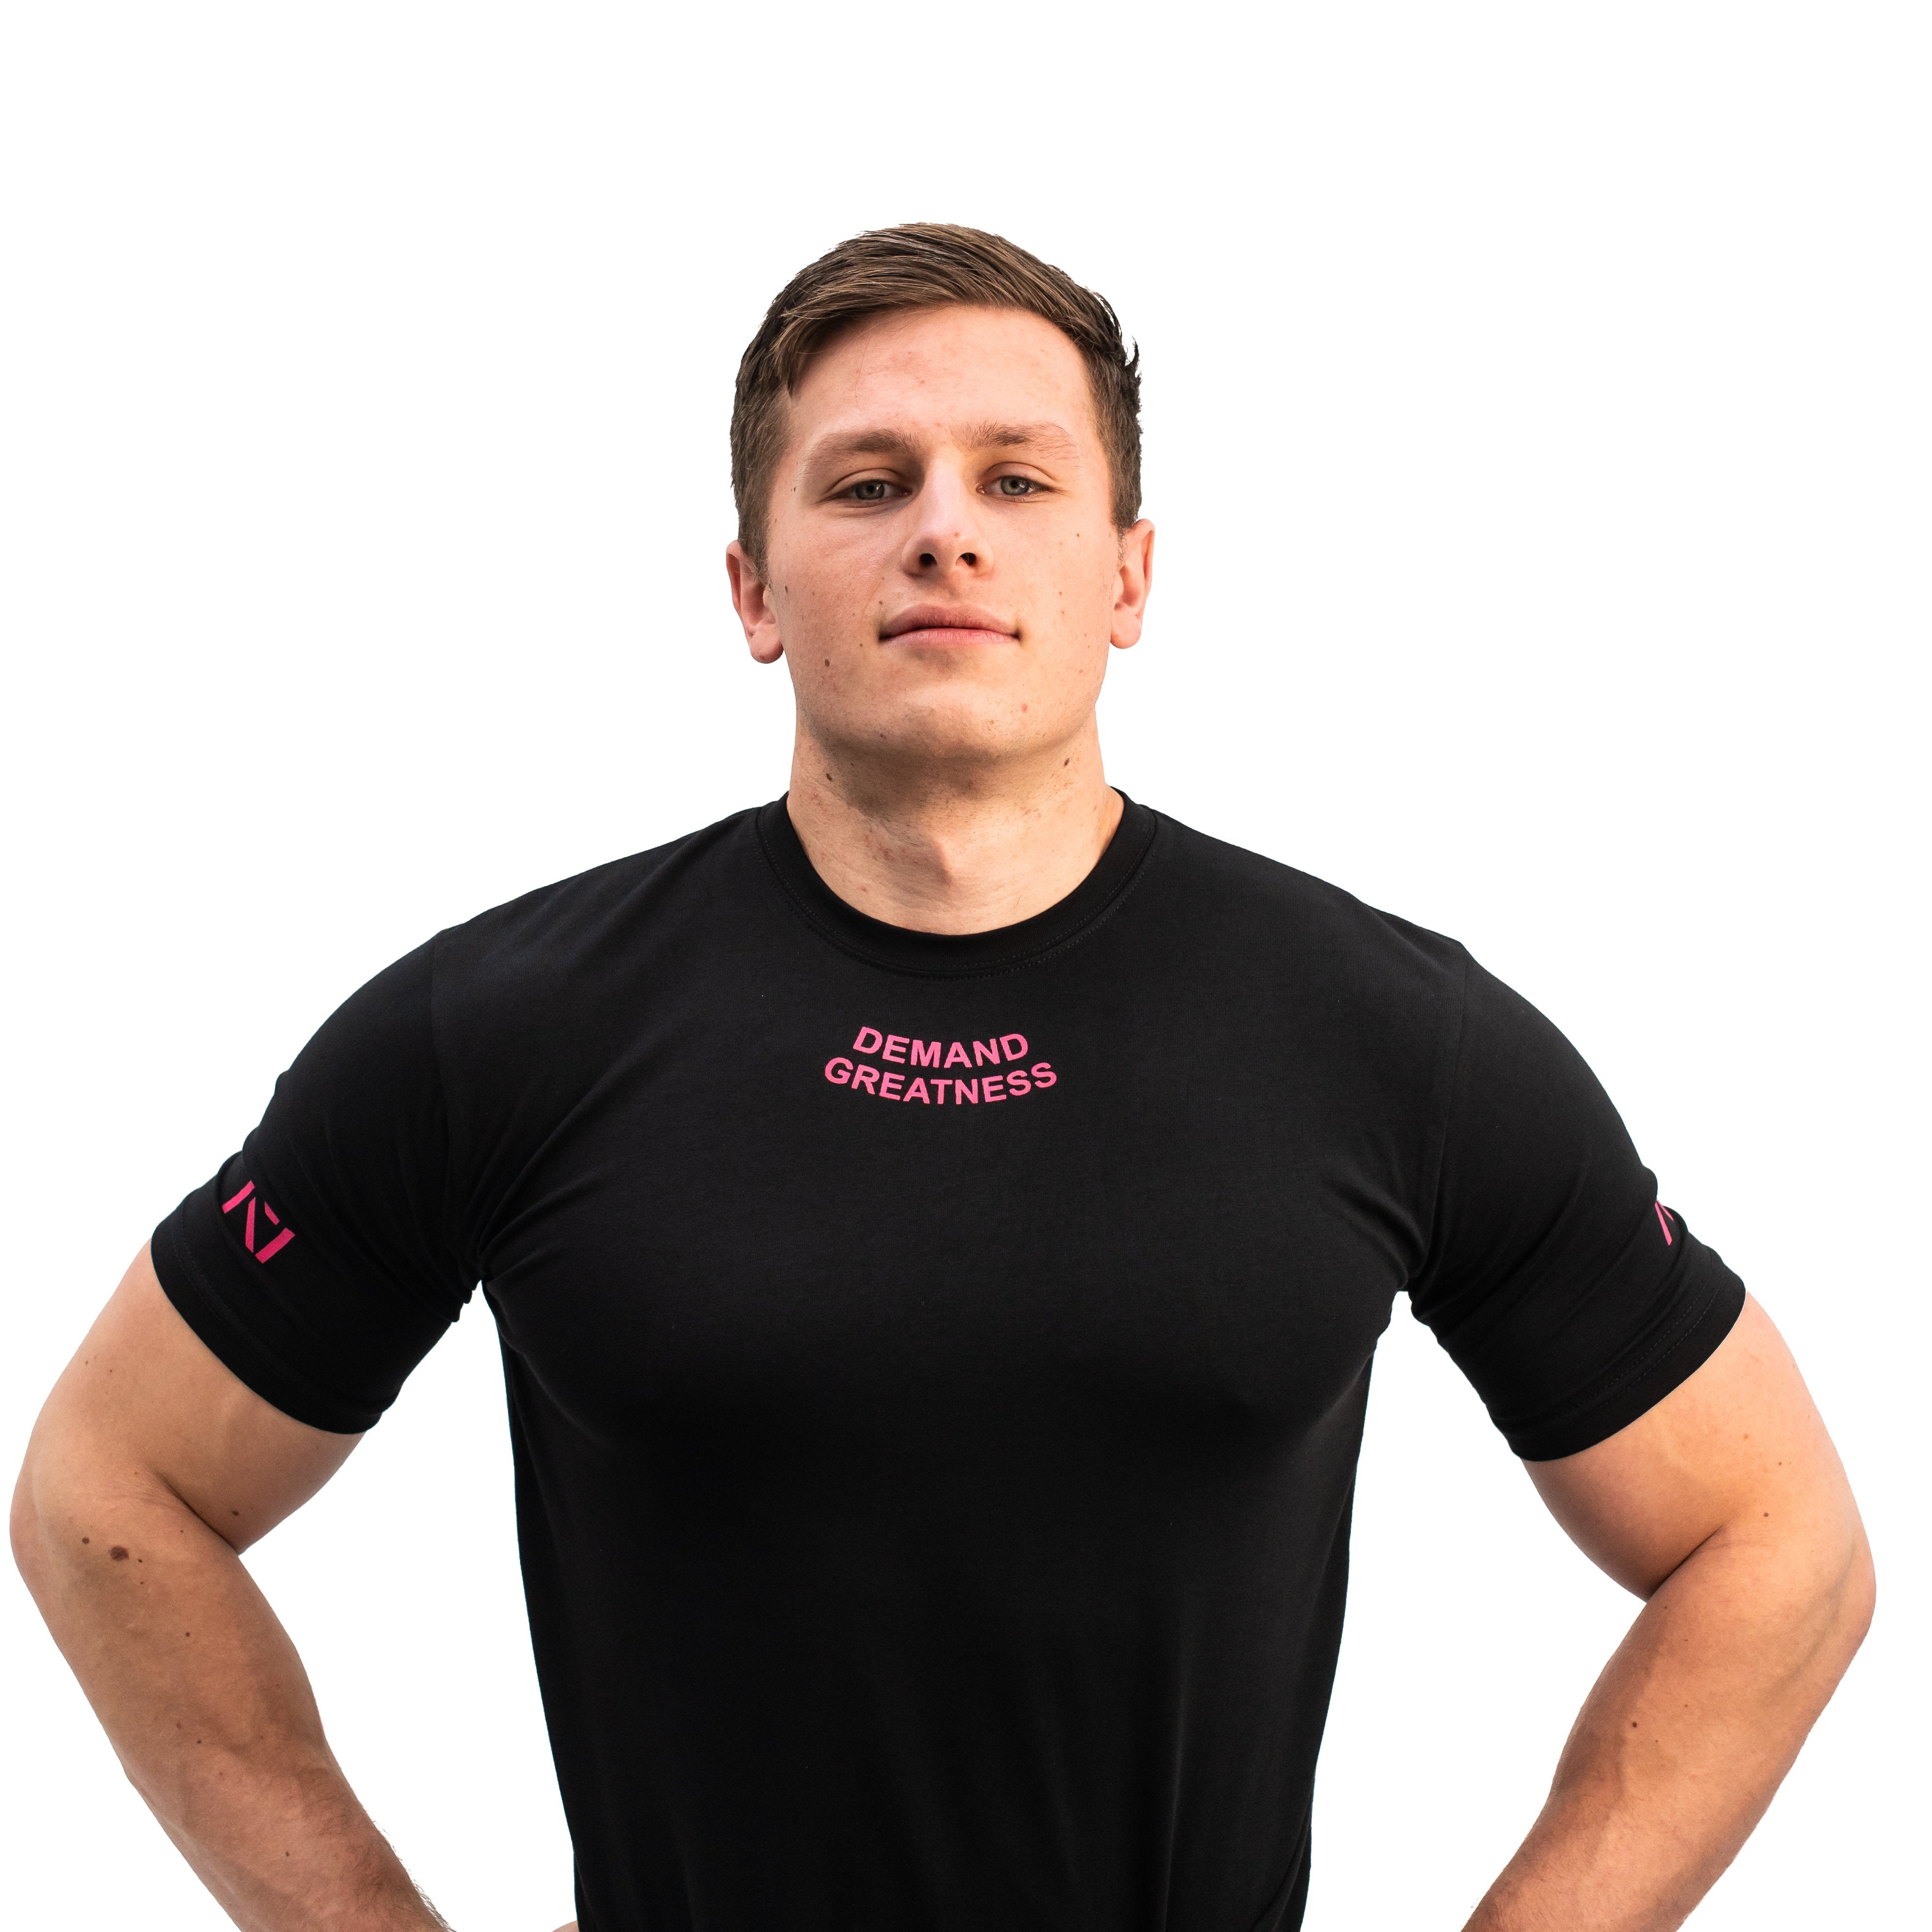 Standout from the crowd in our Pink Demand Greatness Meet Shirt and let your energy show on the platform, in your training or while out and about. Our Meet tees offer a level of comfort like no other through their unique blend of materials and stretch in the places you desire for a comfortable fit that keeps your mind on your performance